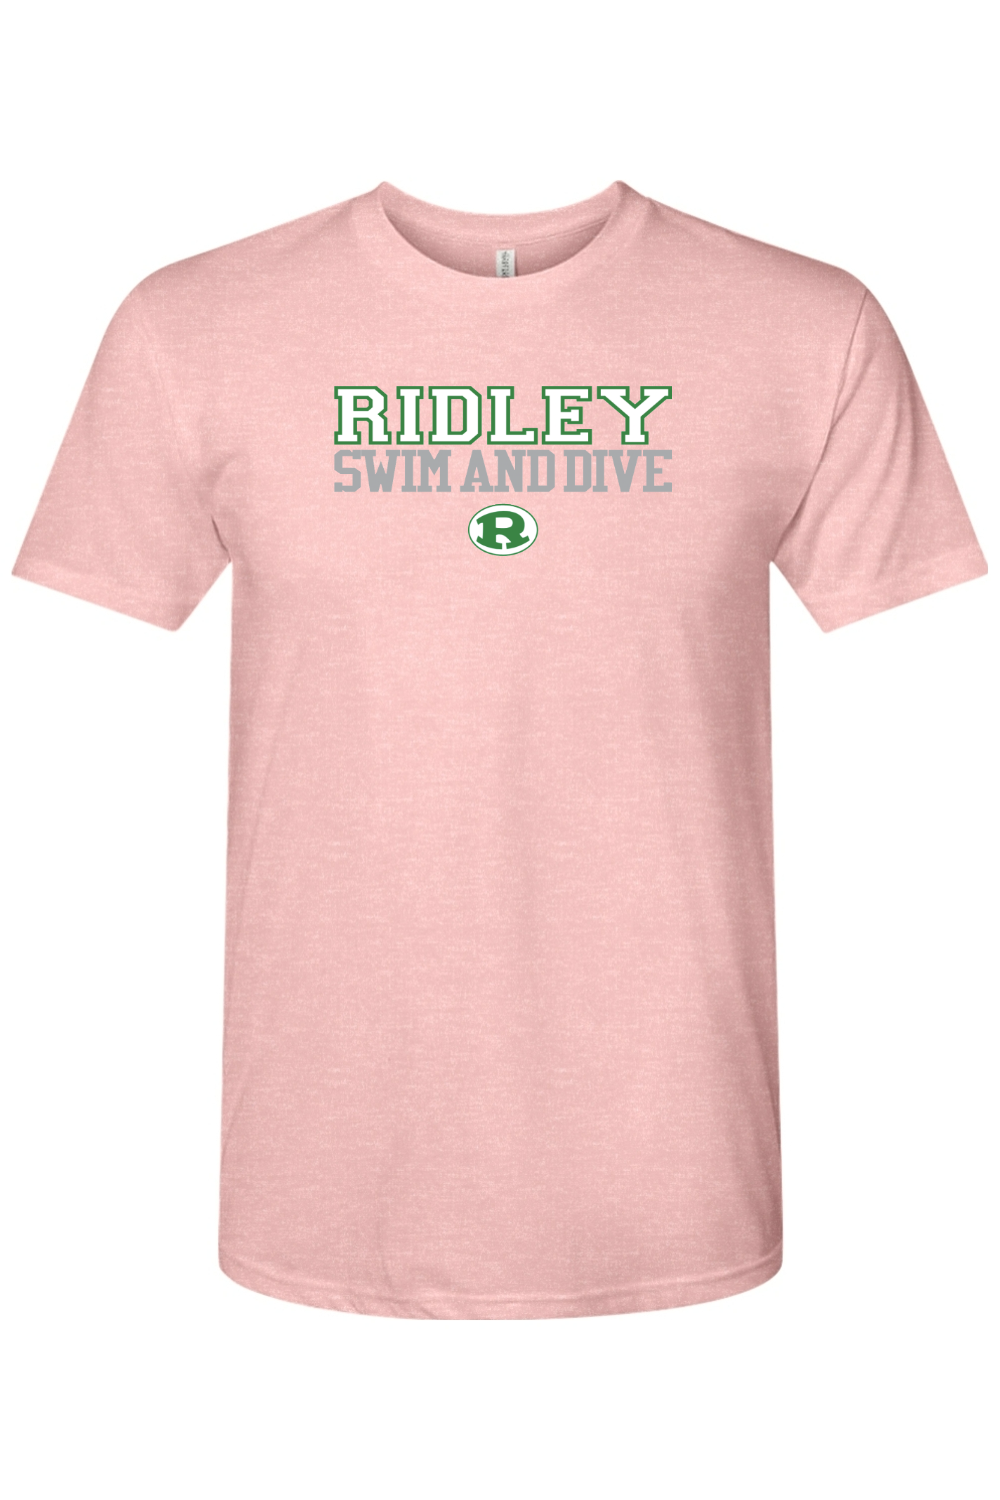 Ridley Swim and Dive Triblend T-Shirt